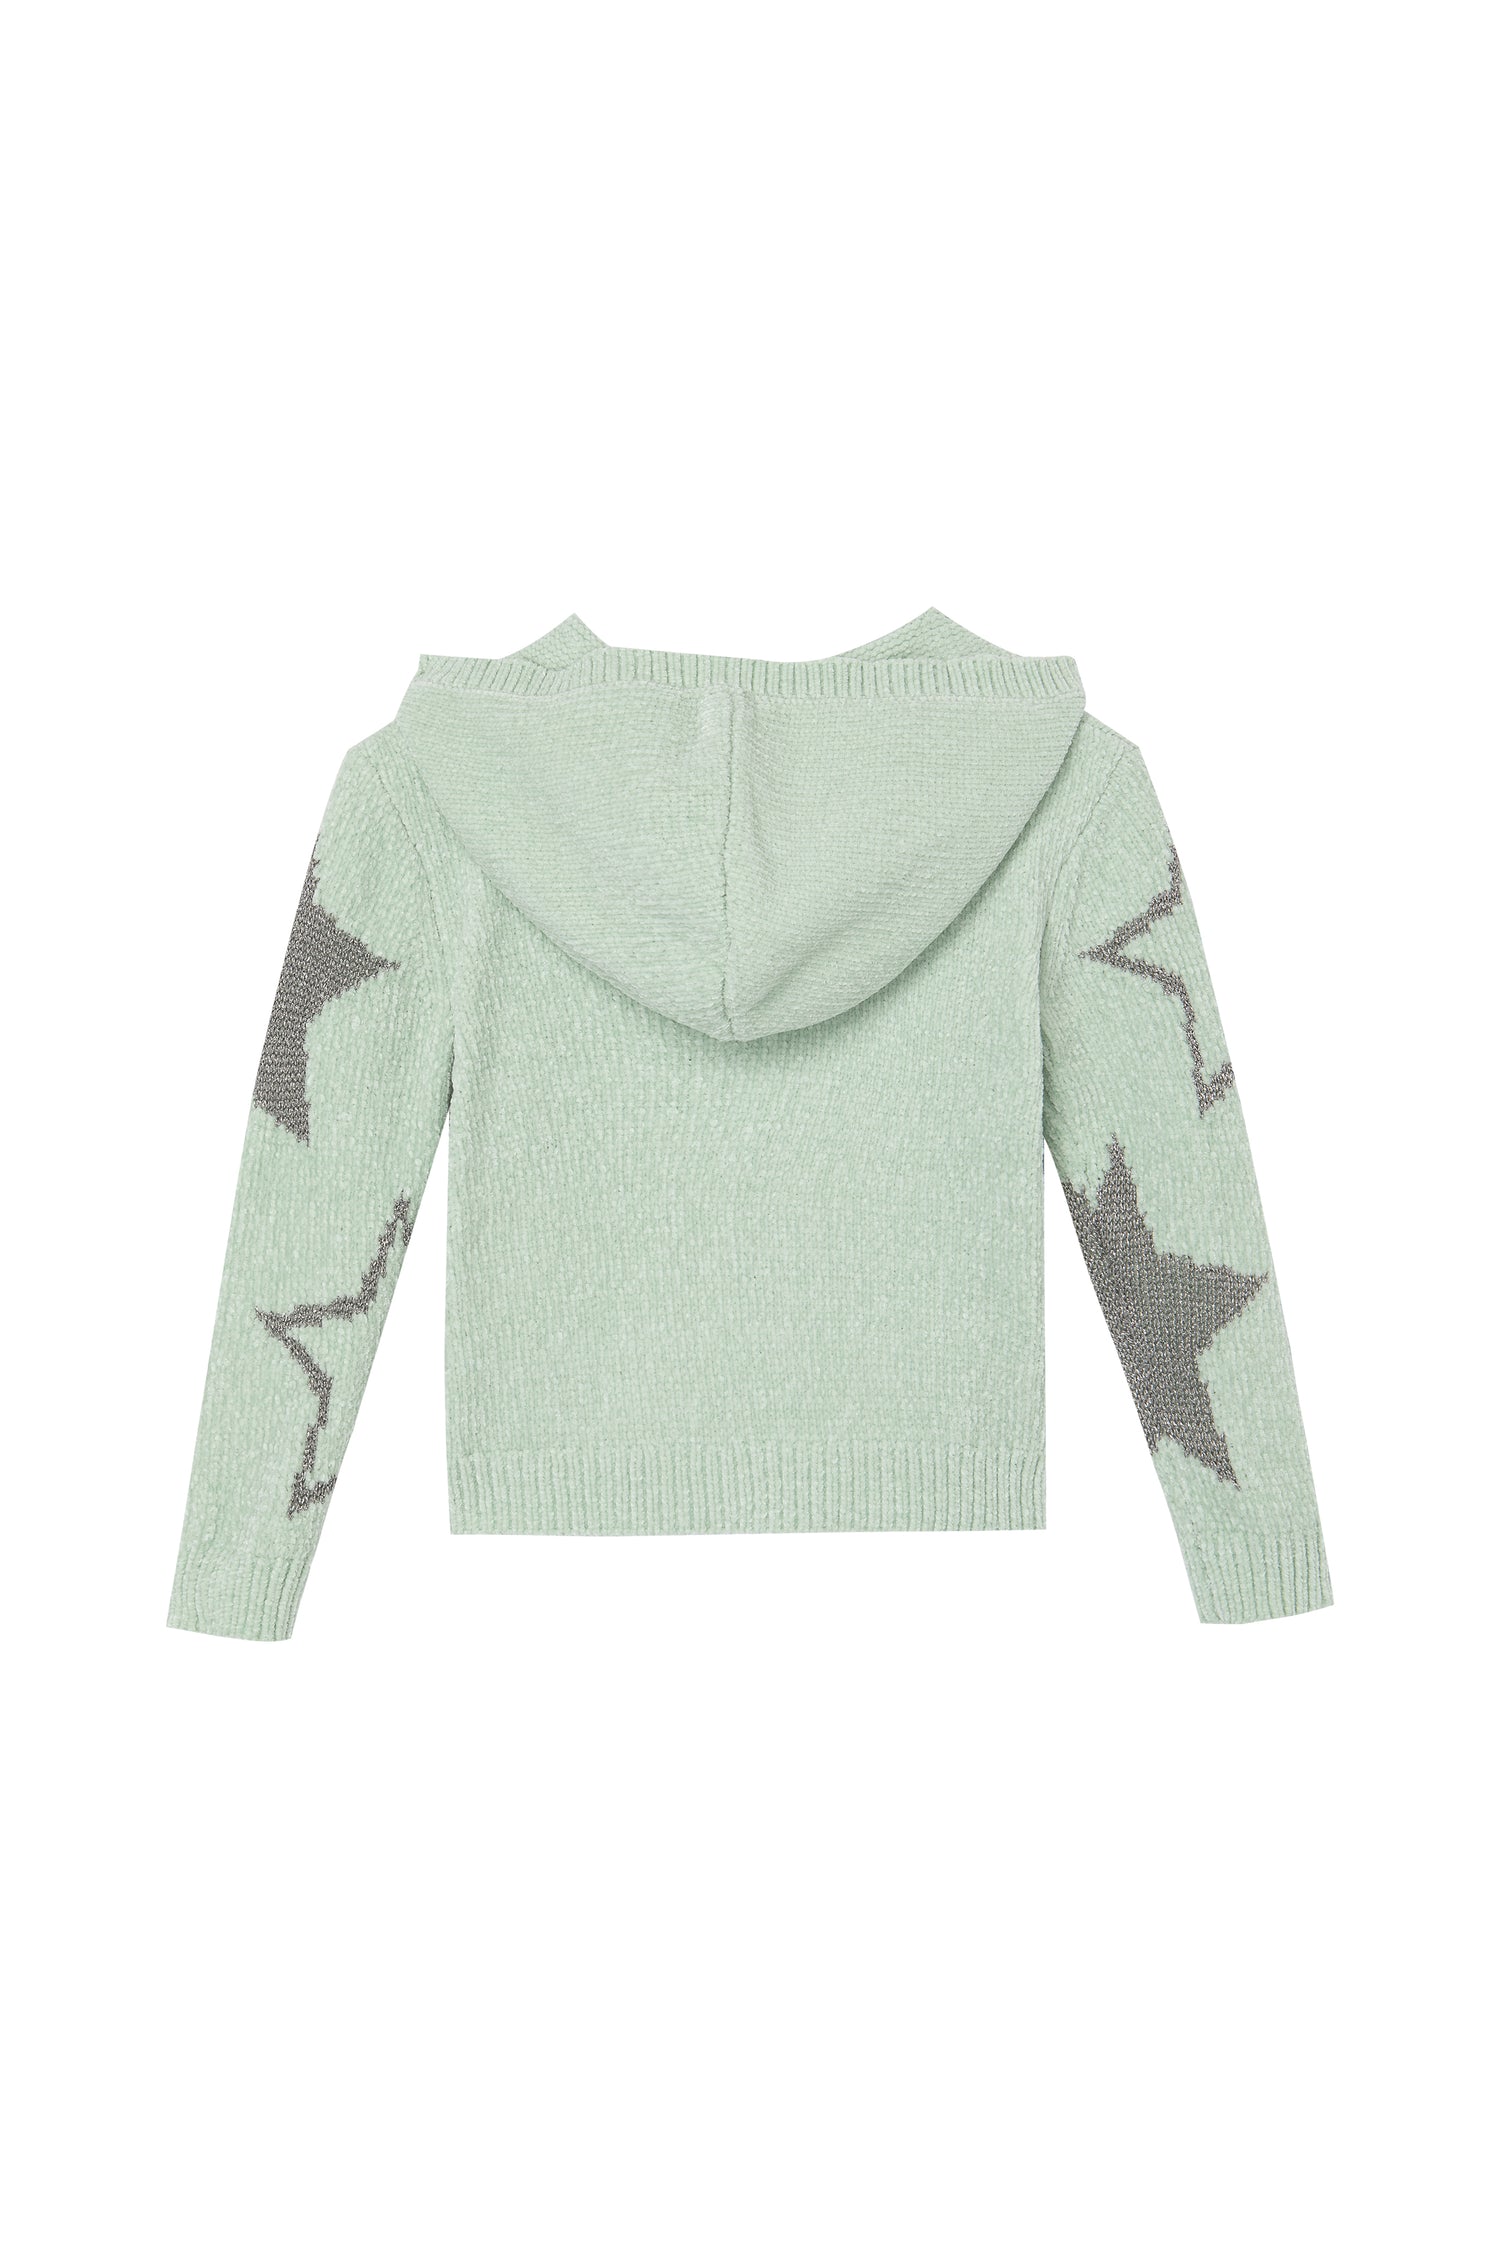 Back view of sage green zip up hoodie with stars 